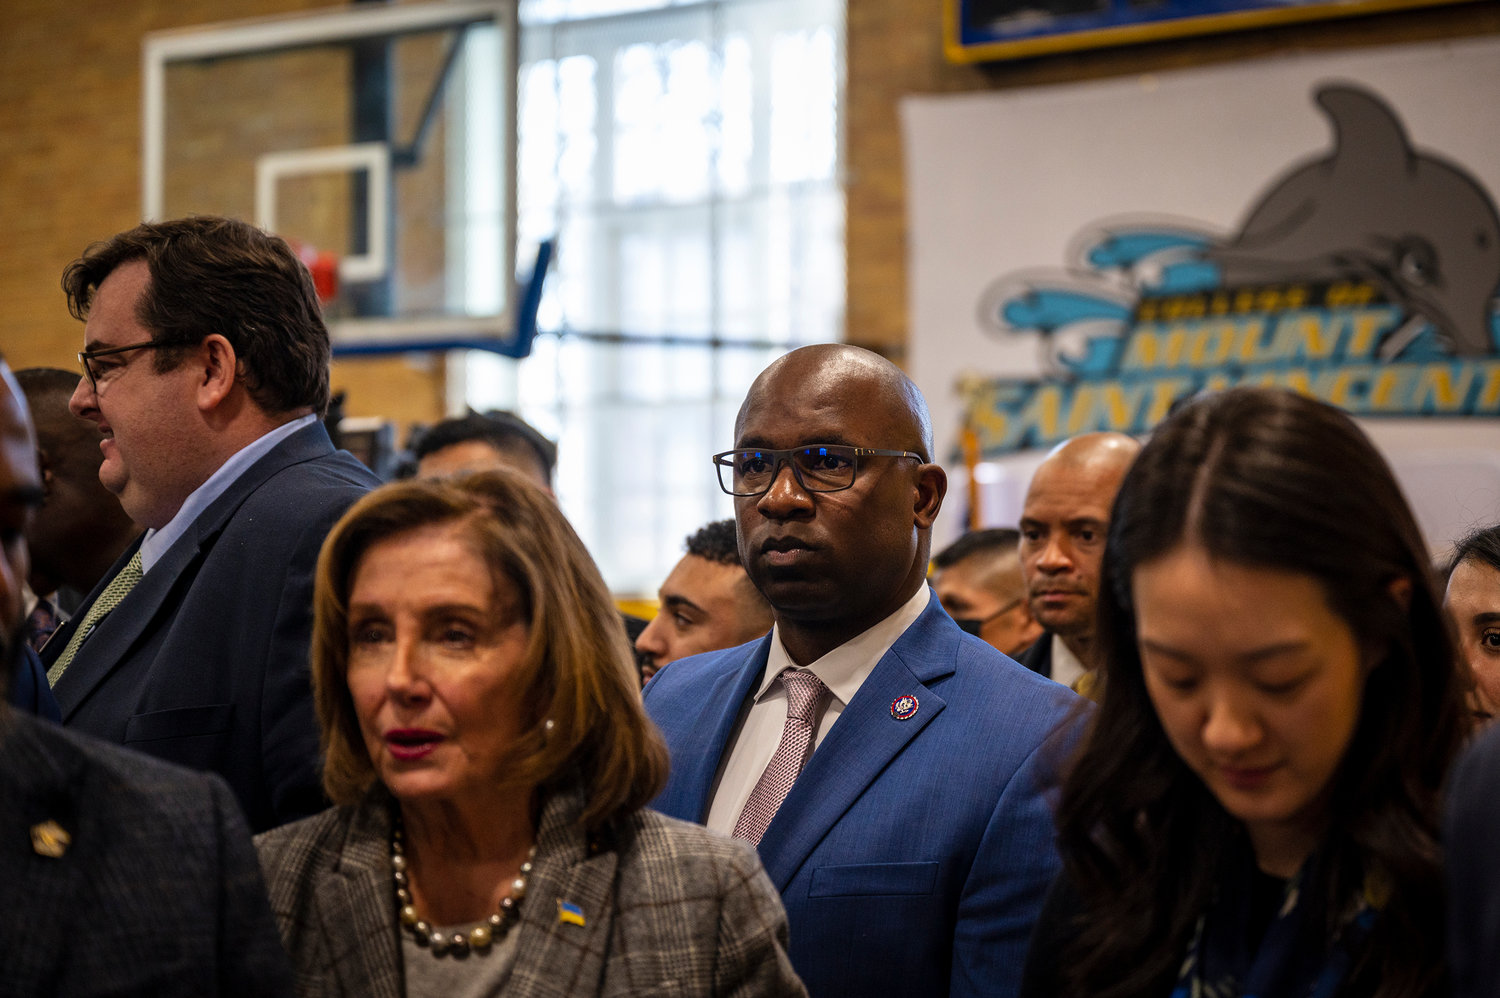 U.S. Rep. Jamaal Bowman takes a few minutes to talk with some of the invitees to his Monday town hall with House Speaker Nancy Pelosi at the College of Mount Saint Vincent.